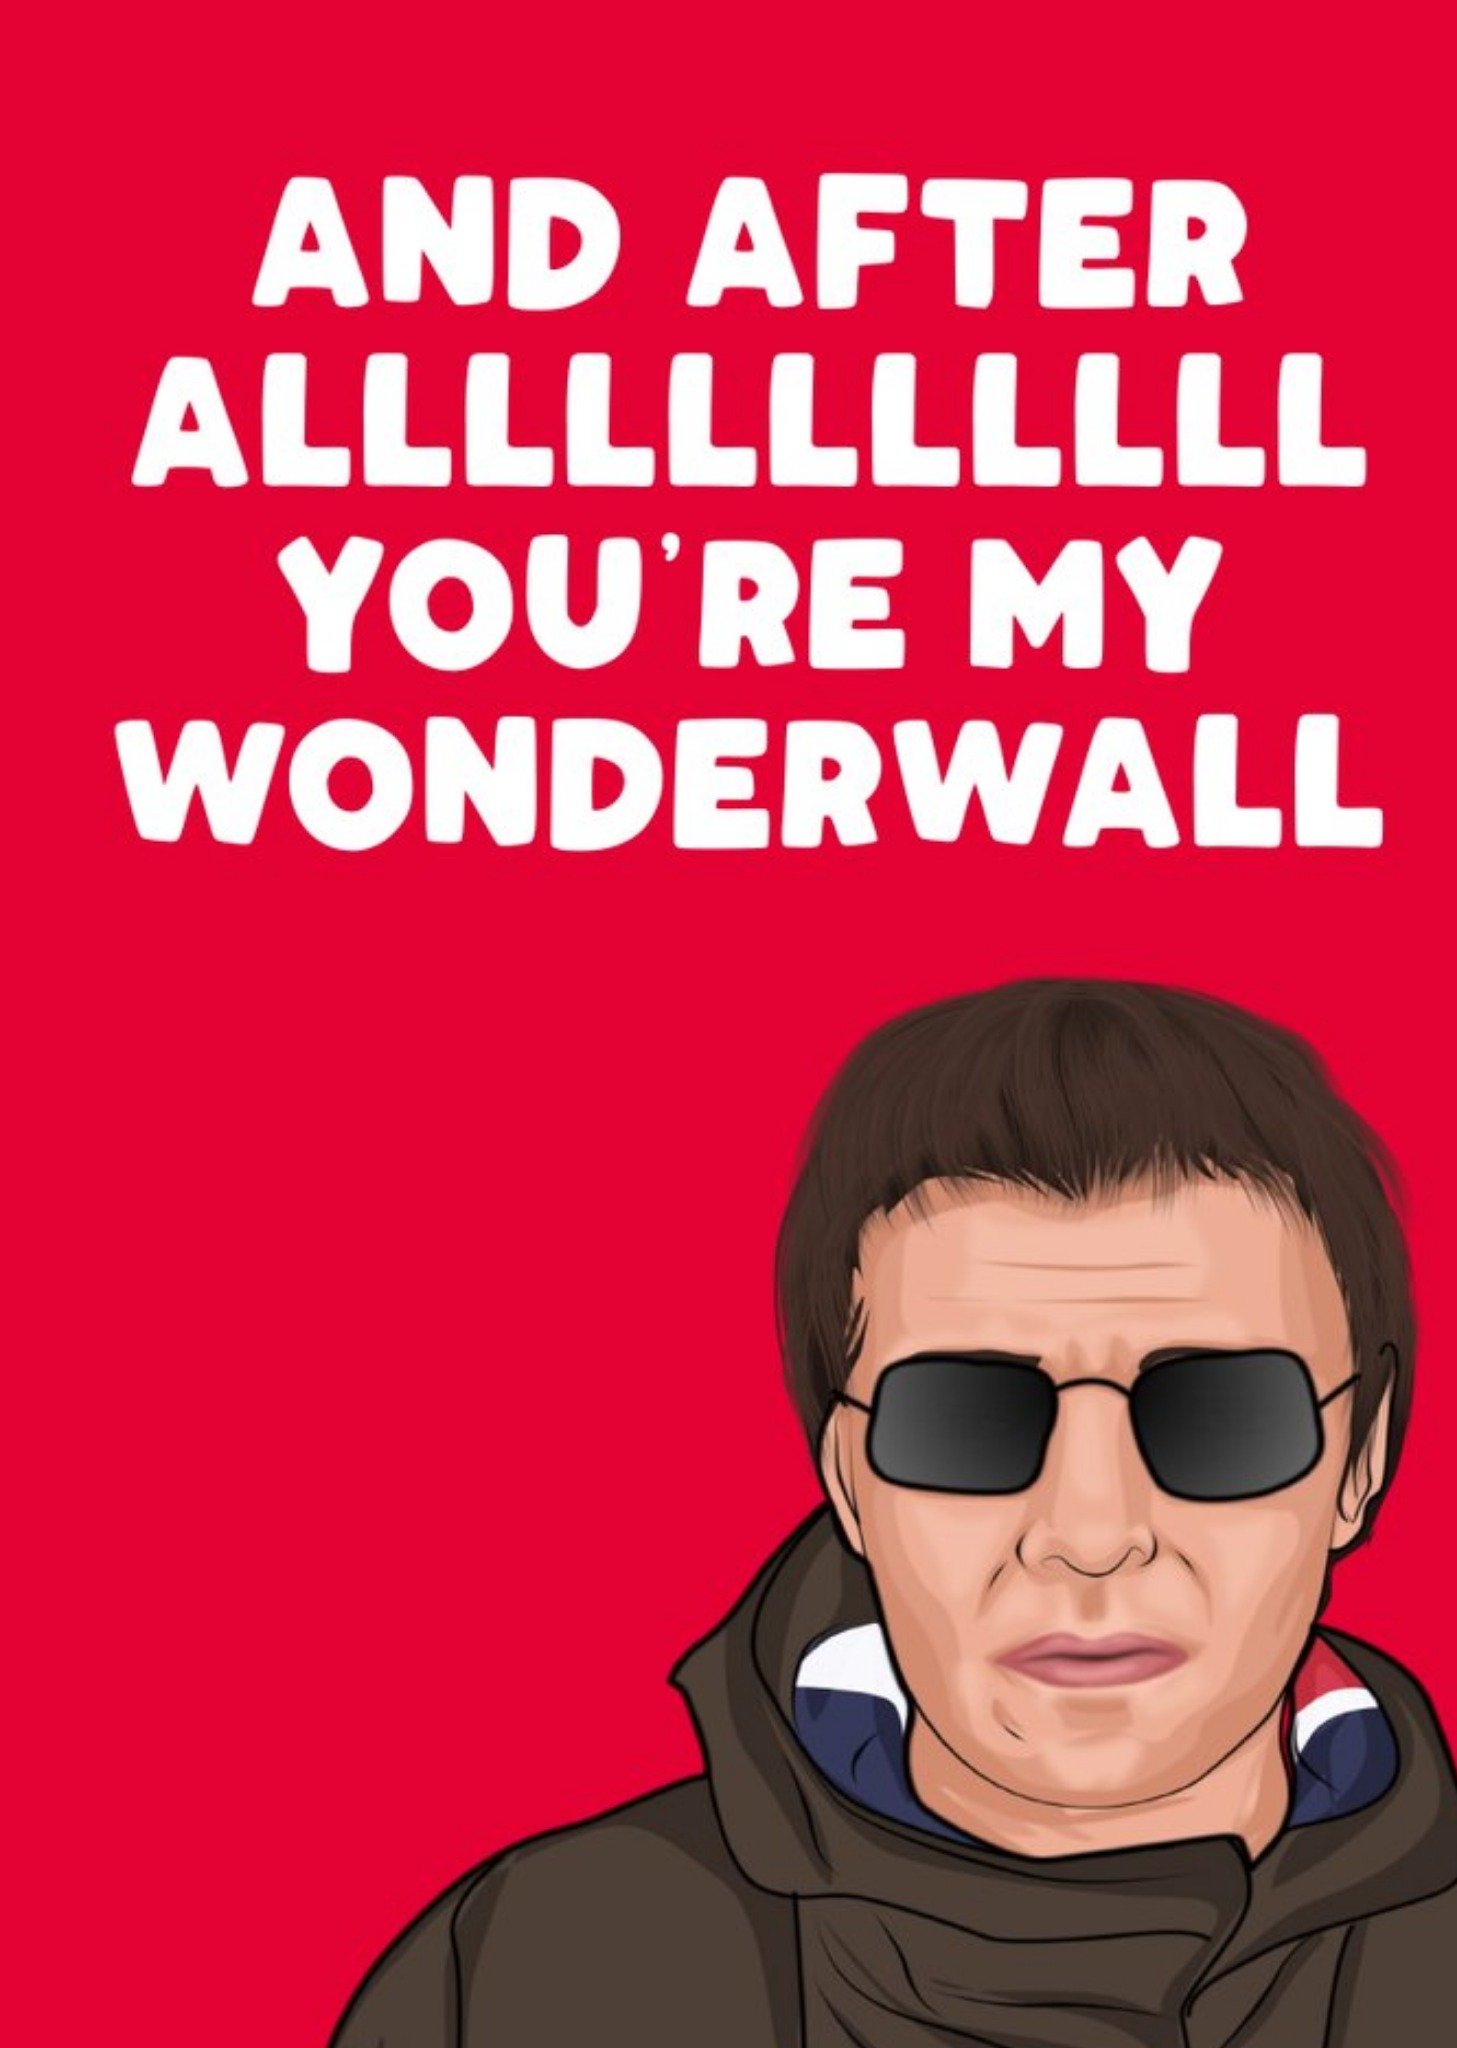 Filthy Sentiments And After All You're My Wonderwall Spoof Card Ecard